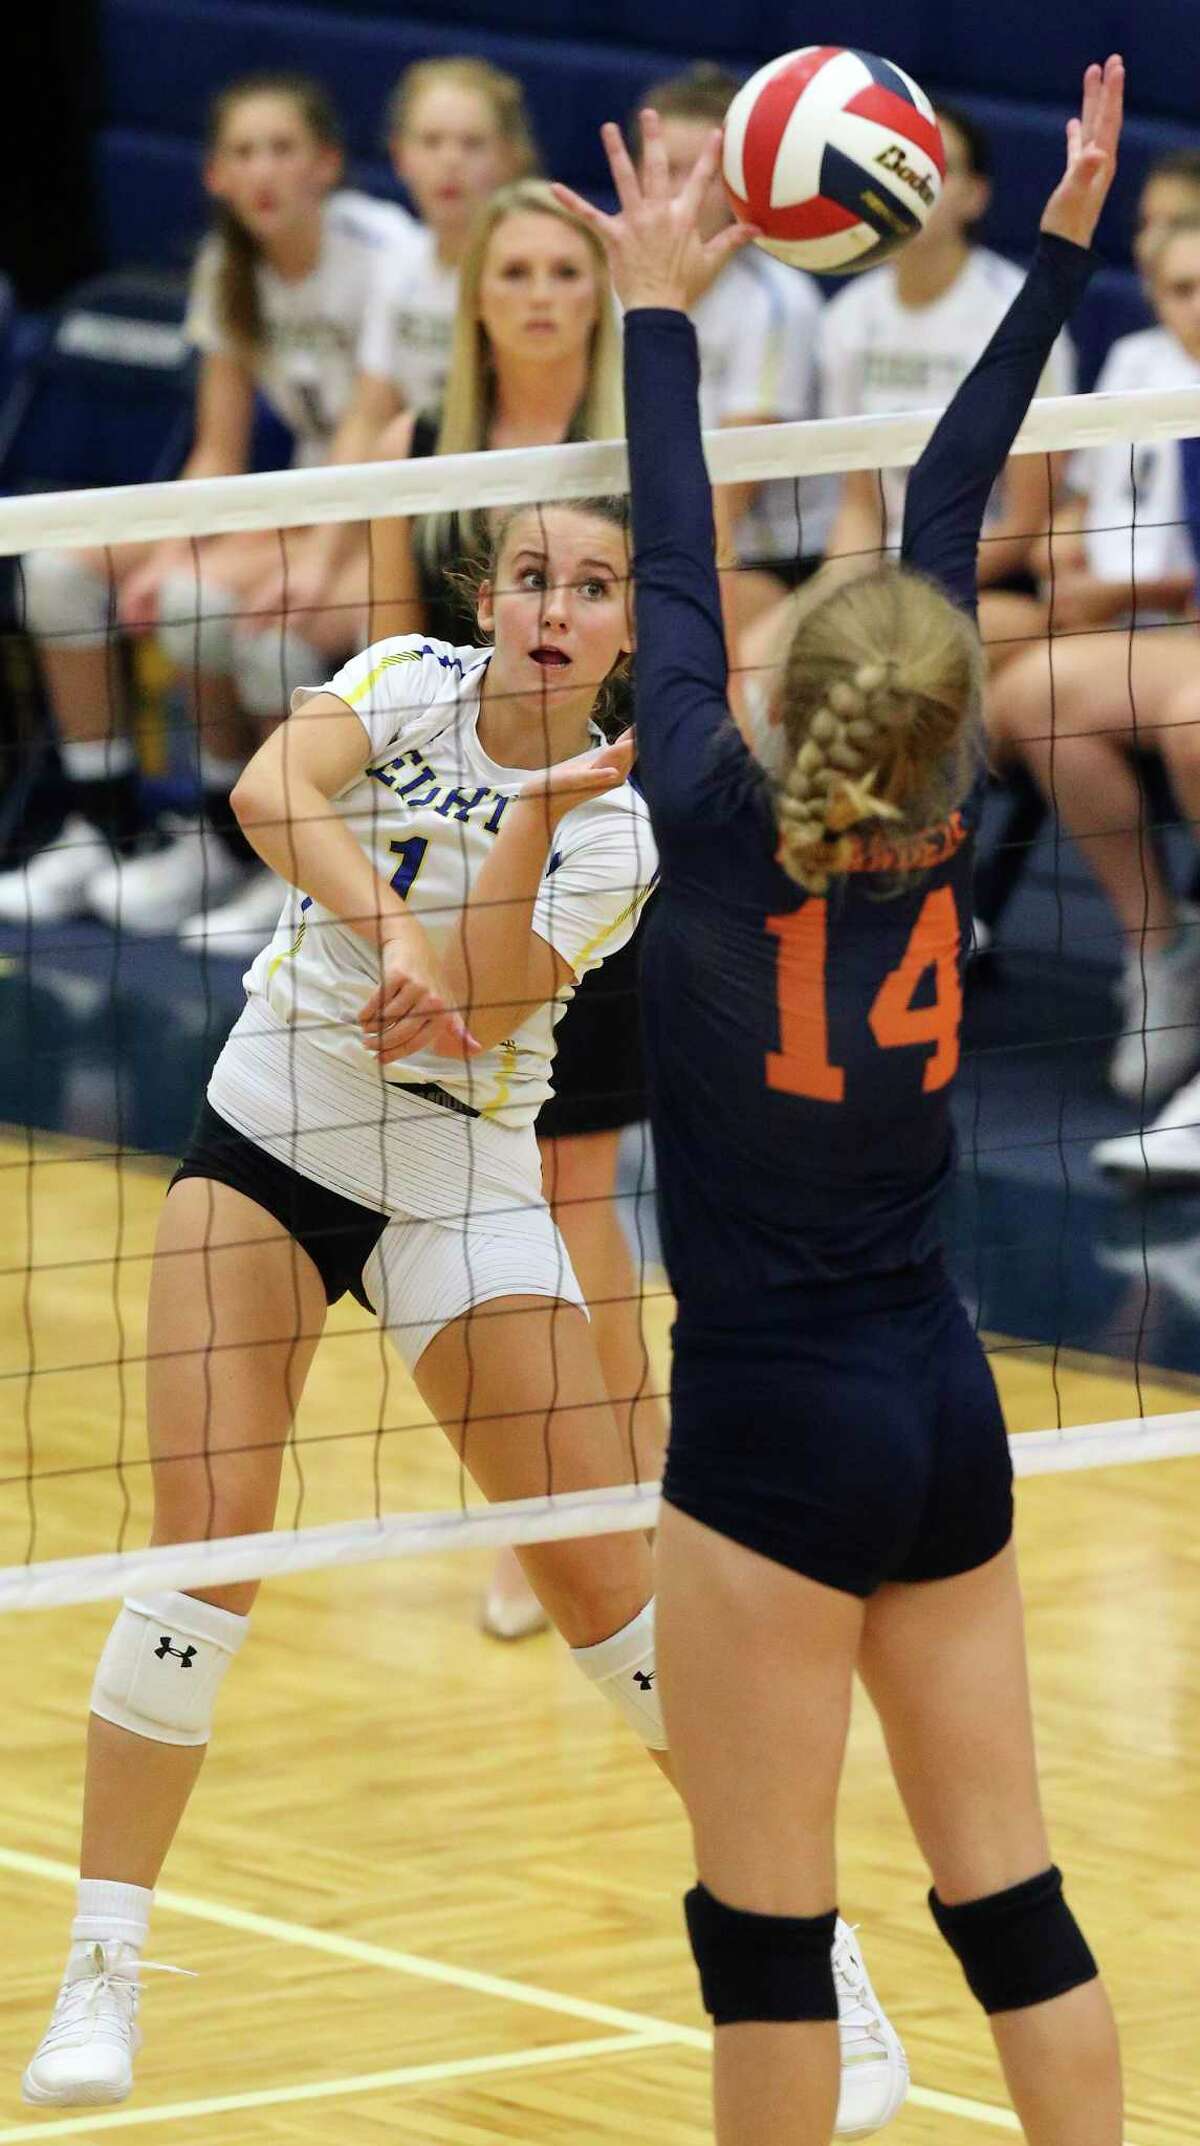 Avery Rosenblum fires the ball for the Mules through Emma Halstead as Brandeis plays Alamo Heights at Taylor Field House on August 120, 2019.